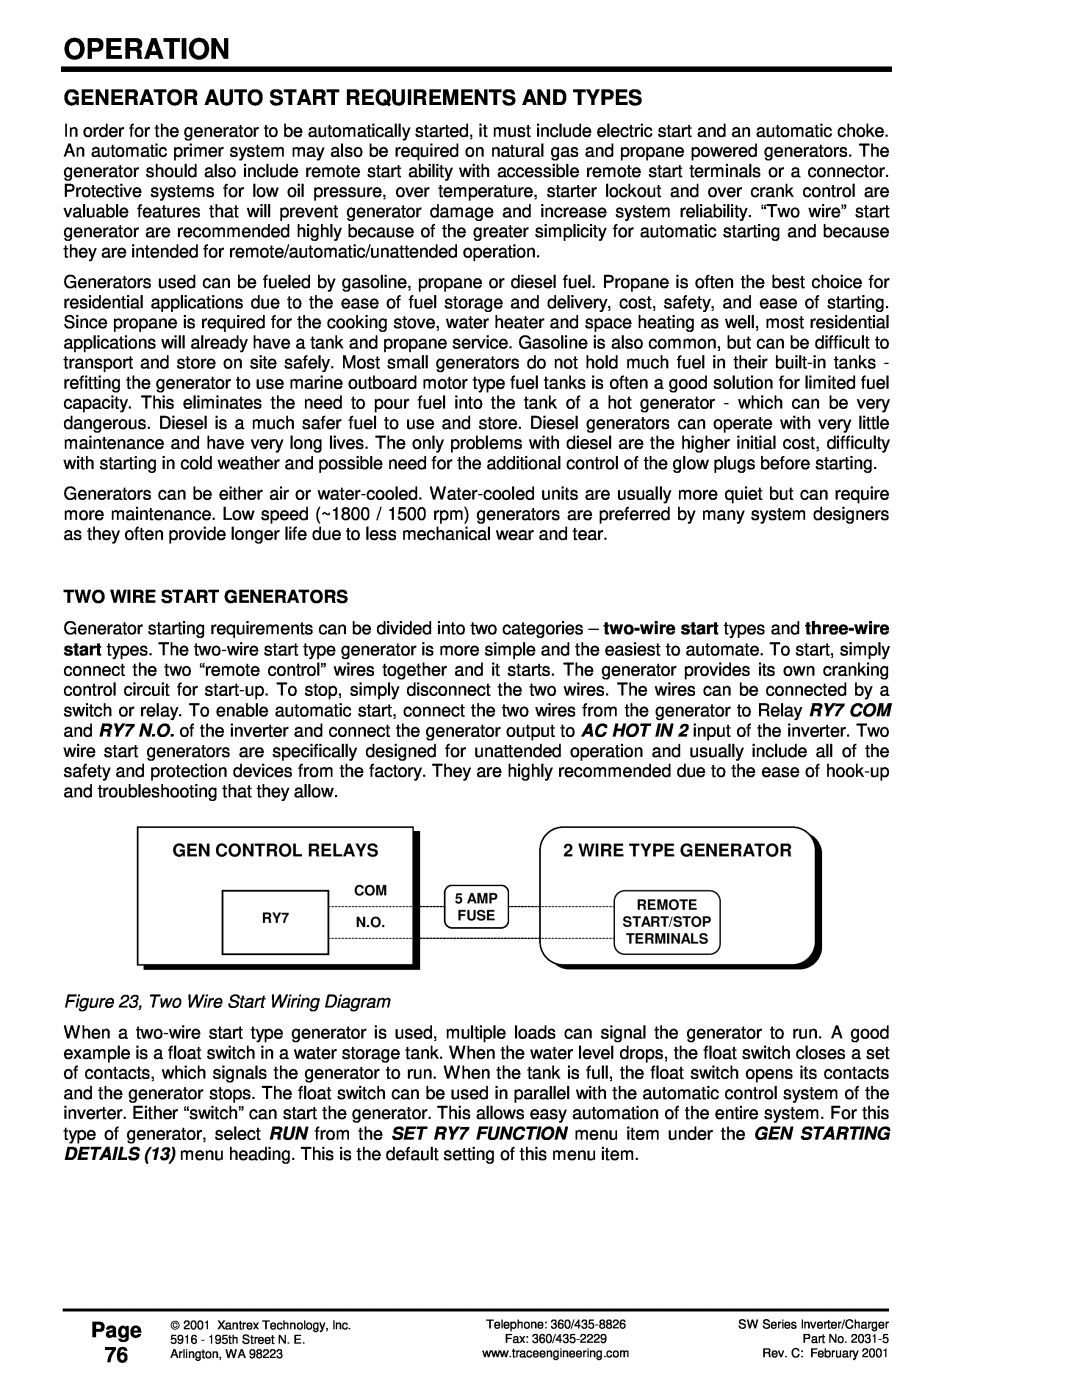 Xantrex Technology SW Series Generator Auto Start Requirements And Types, Page 76, Two Wire Start Generators, Operation 